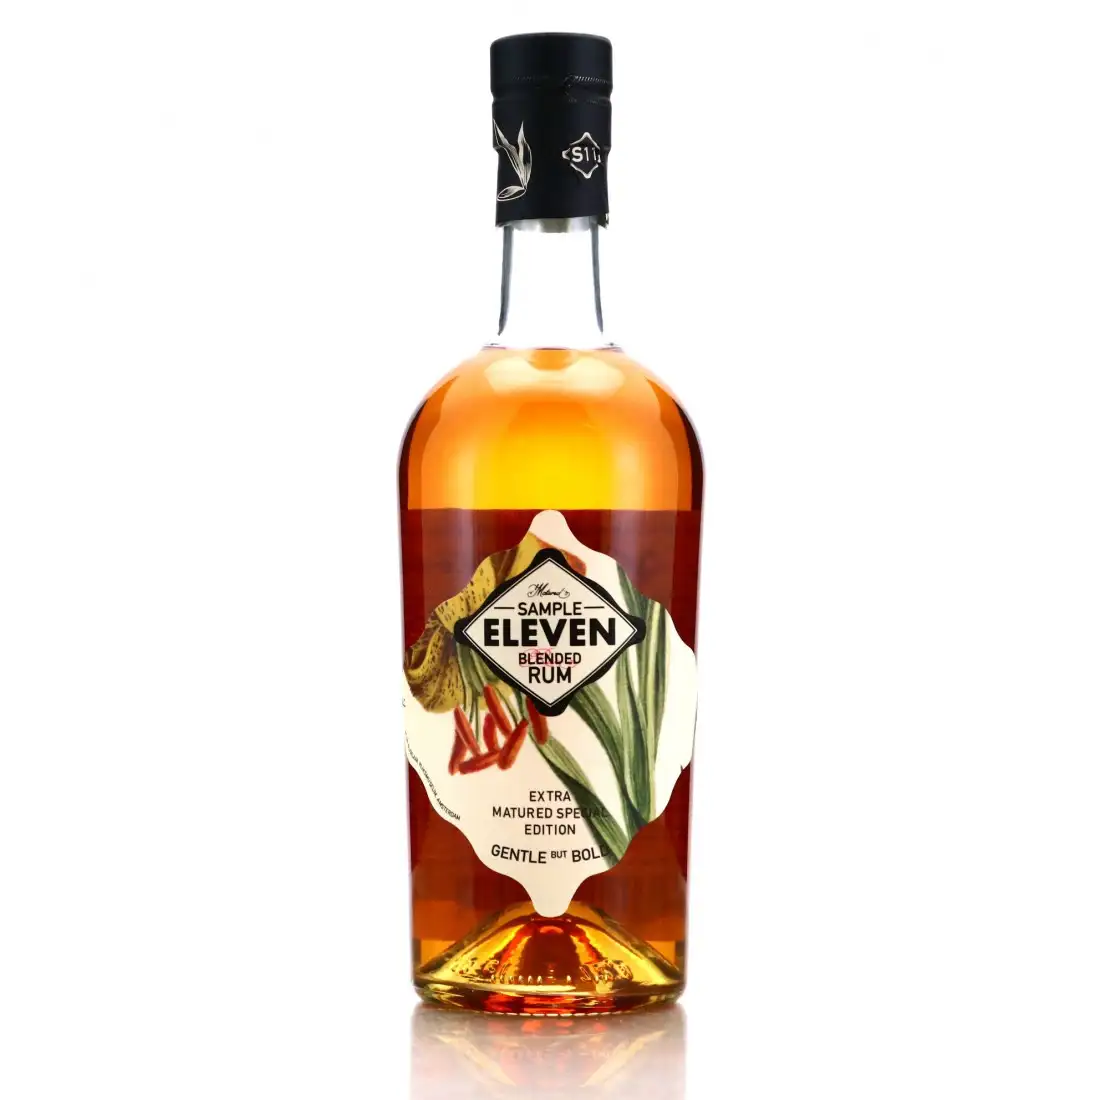 Image of the front of the bottle of the rum Sample Eleven Extra Matured (Gentle but Bold)